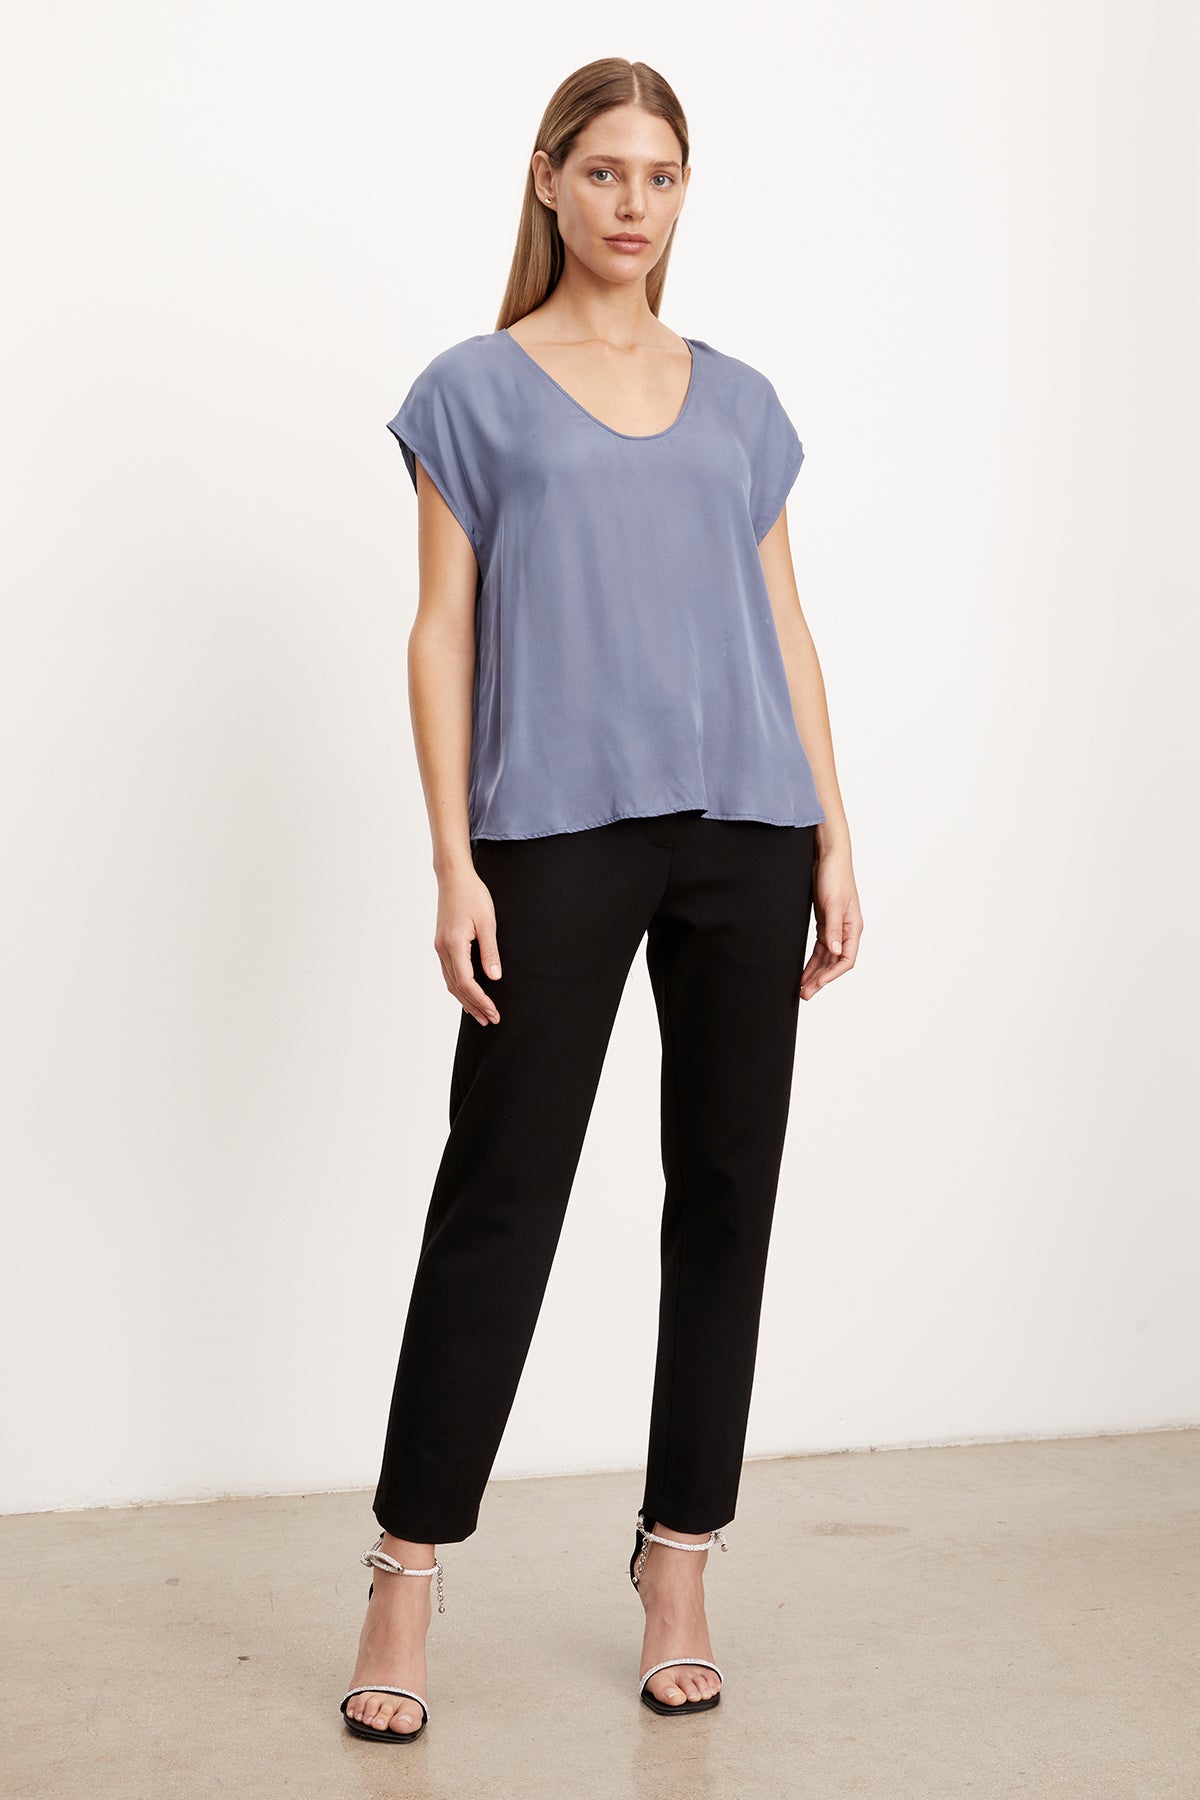 The model is wearing a blue v-neck top and Velvet by Graham & Spencer JAY PONTI STRAIGHT LEG PANT.-35577760940225